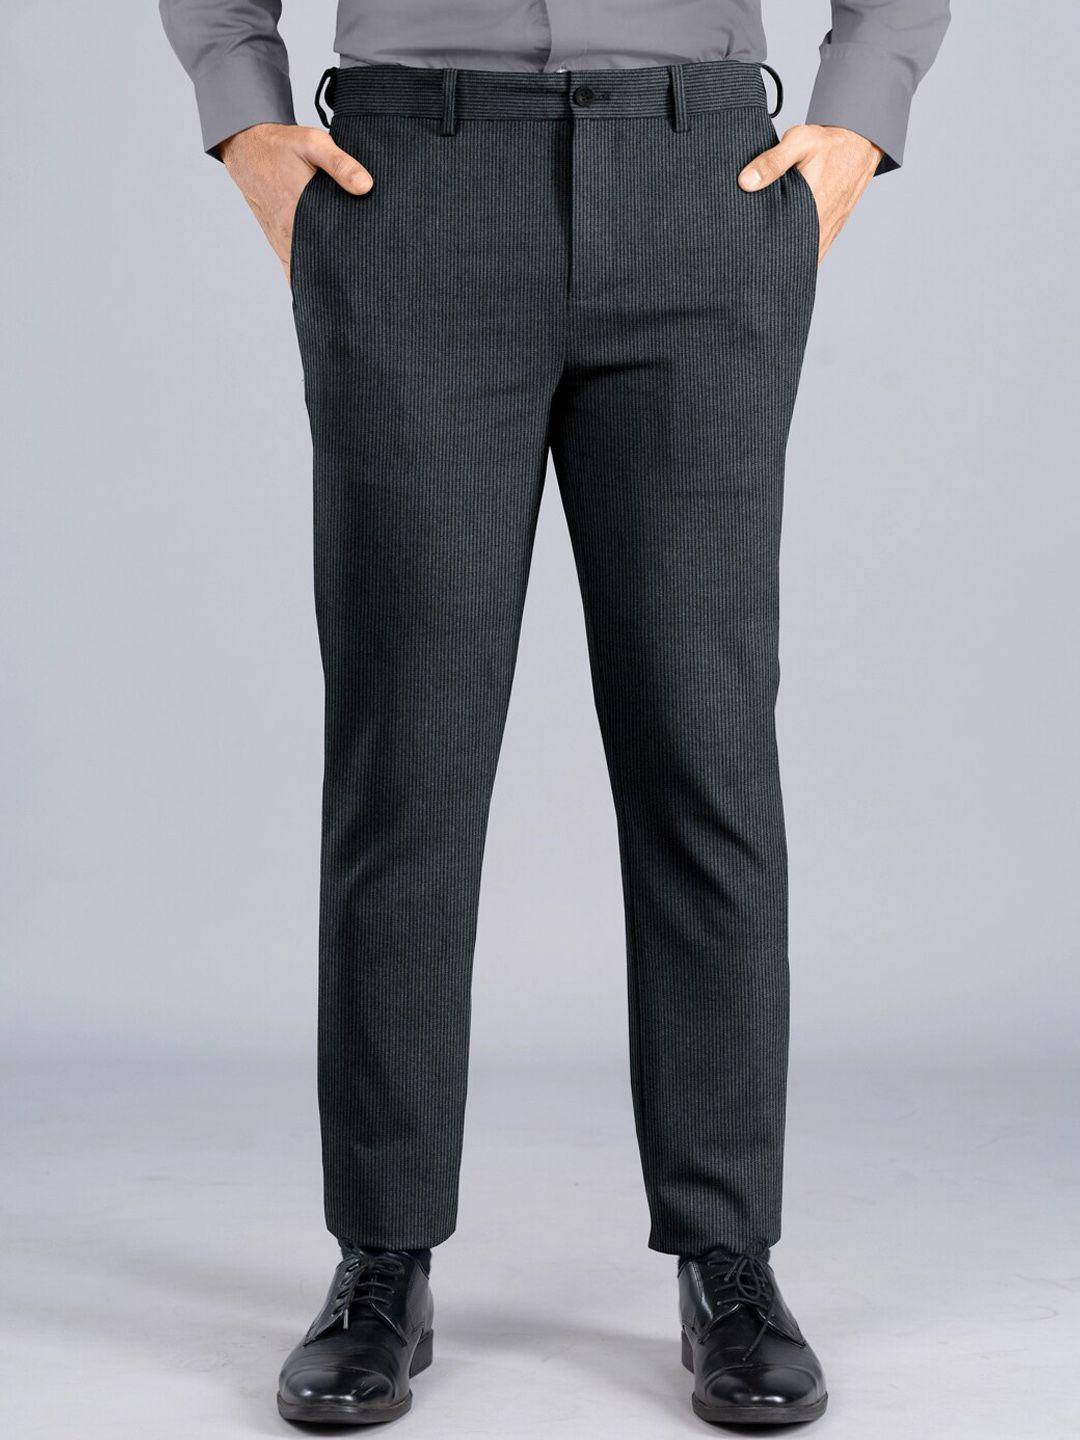 the pant project men striped tailored slim fit wrinkle free formal trousers